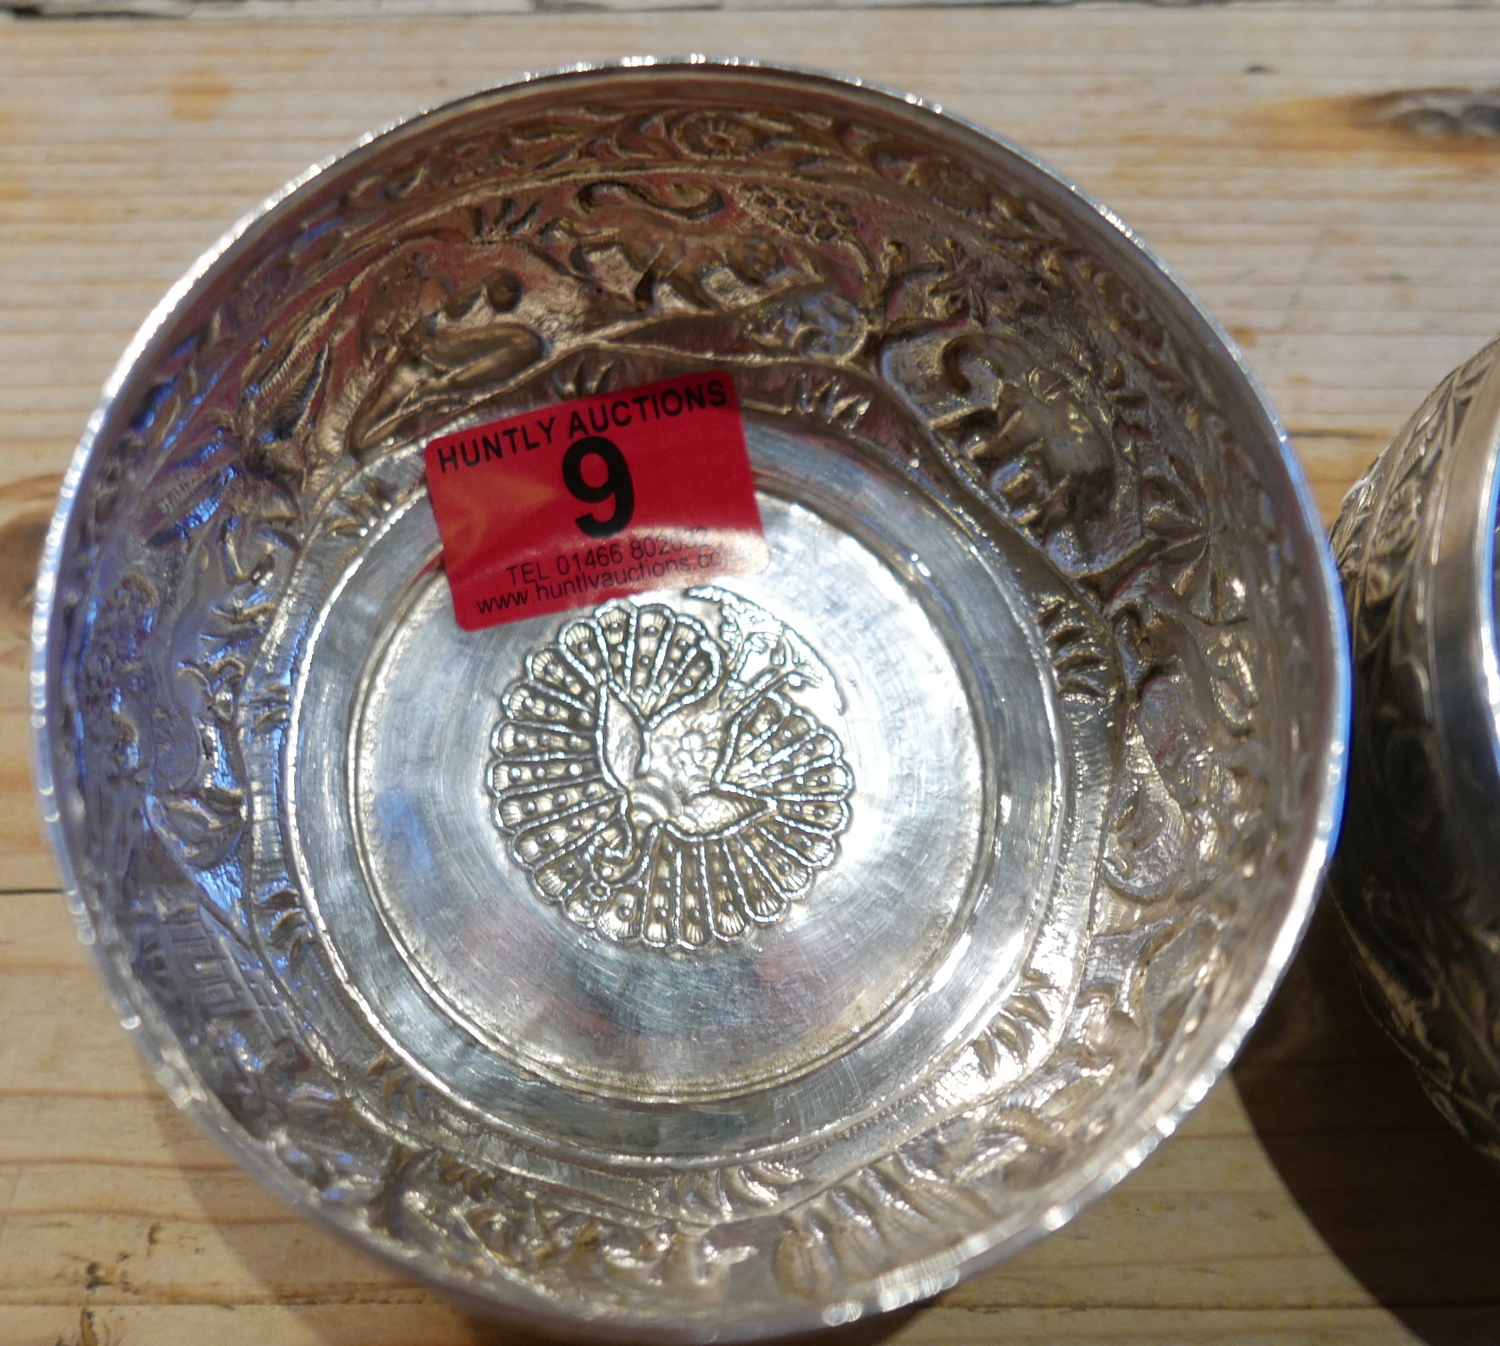 Antique Pair of Indian/Burmese White Metal Bowls with Peacock Marks to base - 233 grams. - Image 2 of 8